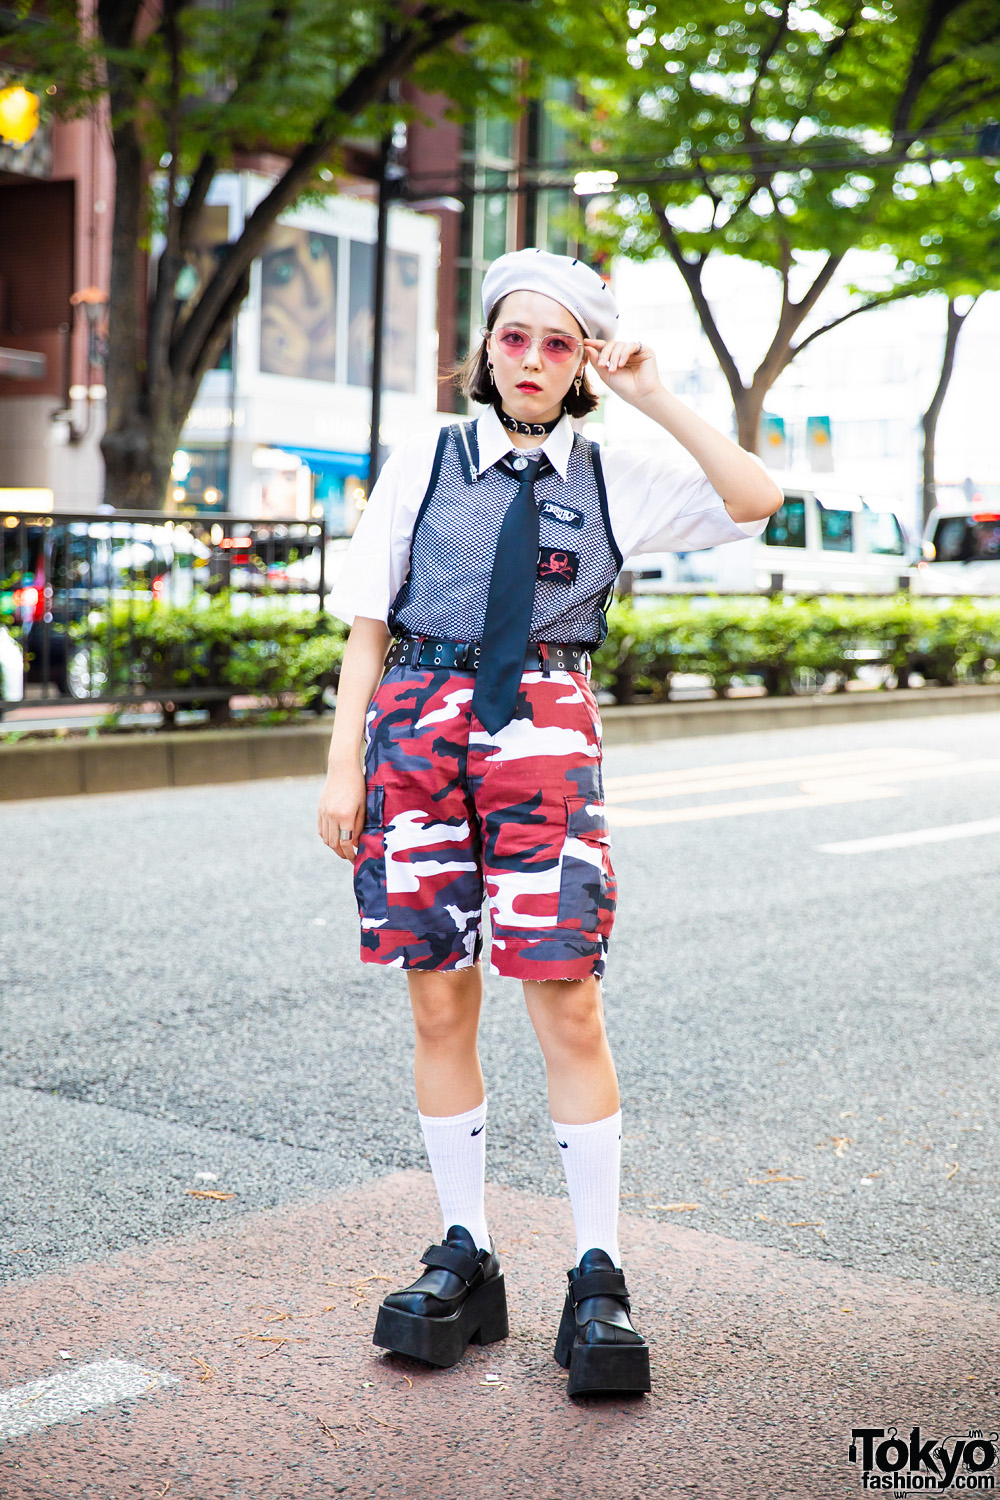 Harajuku Girl in Vintage Streetwear Style w/ (Me) & Another Youth